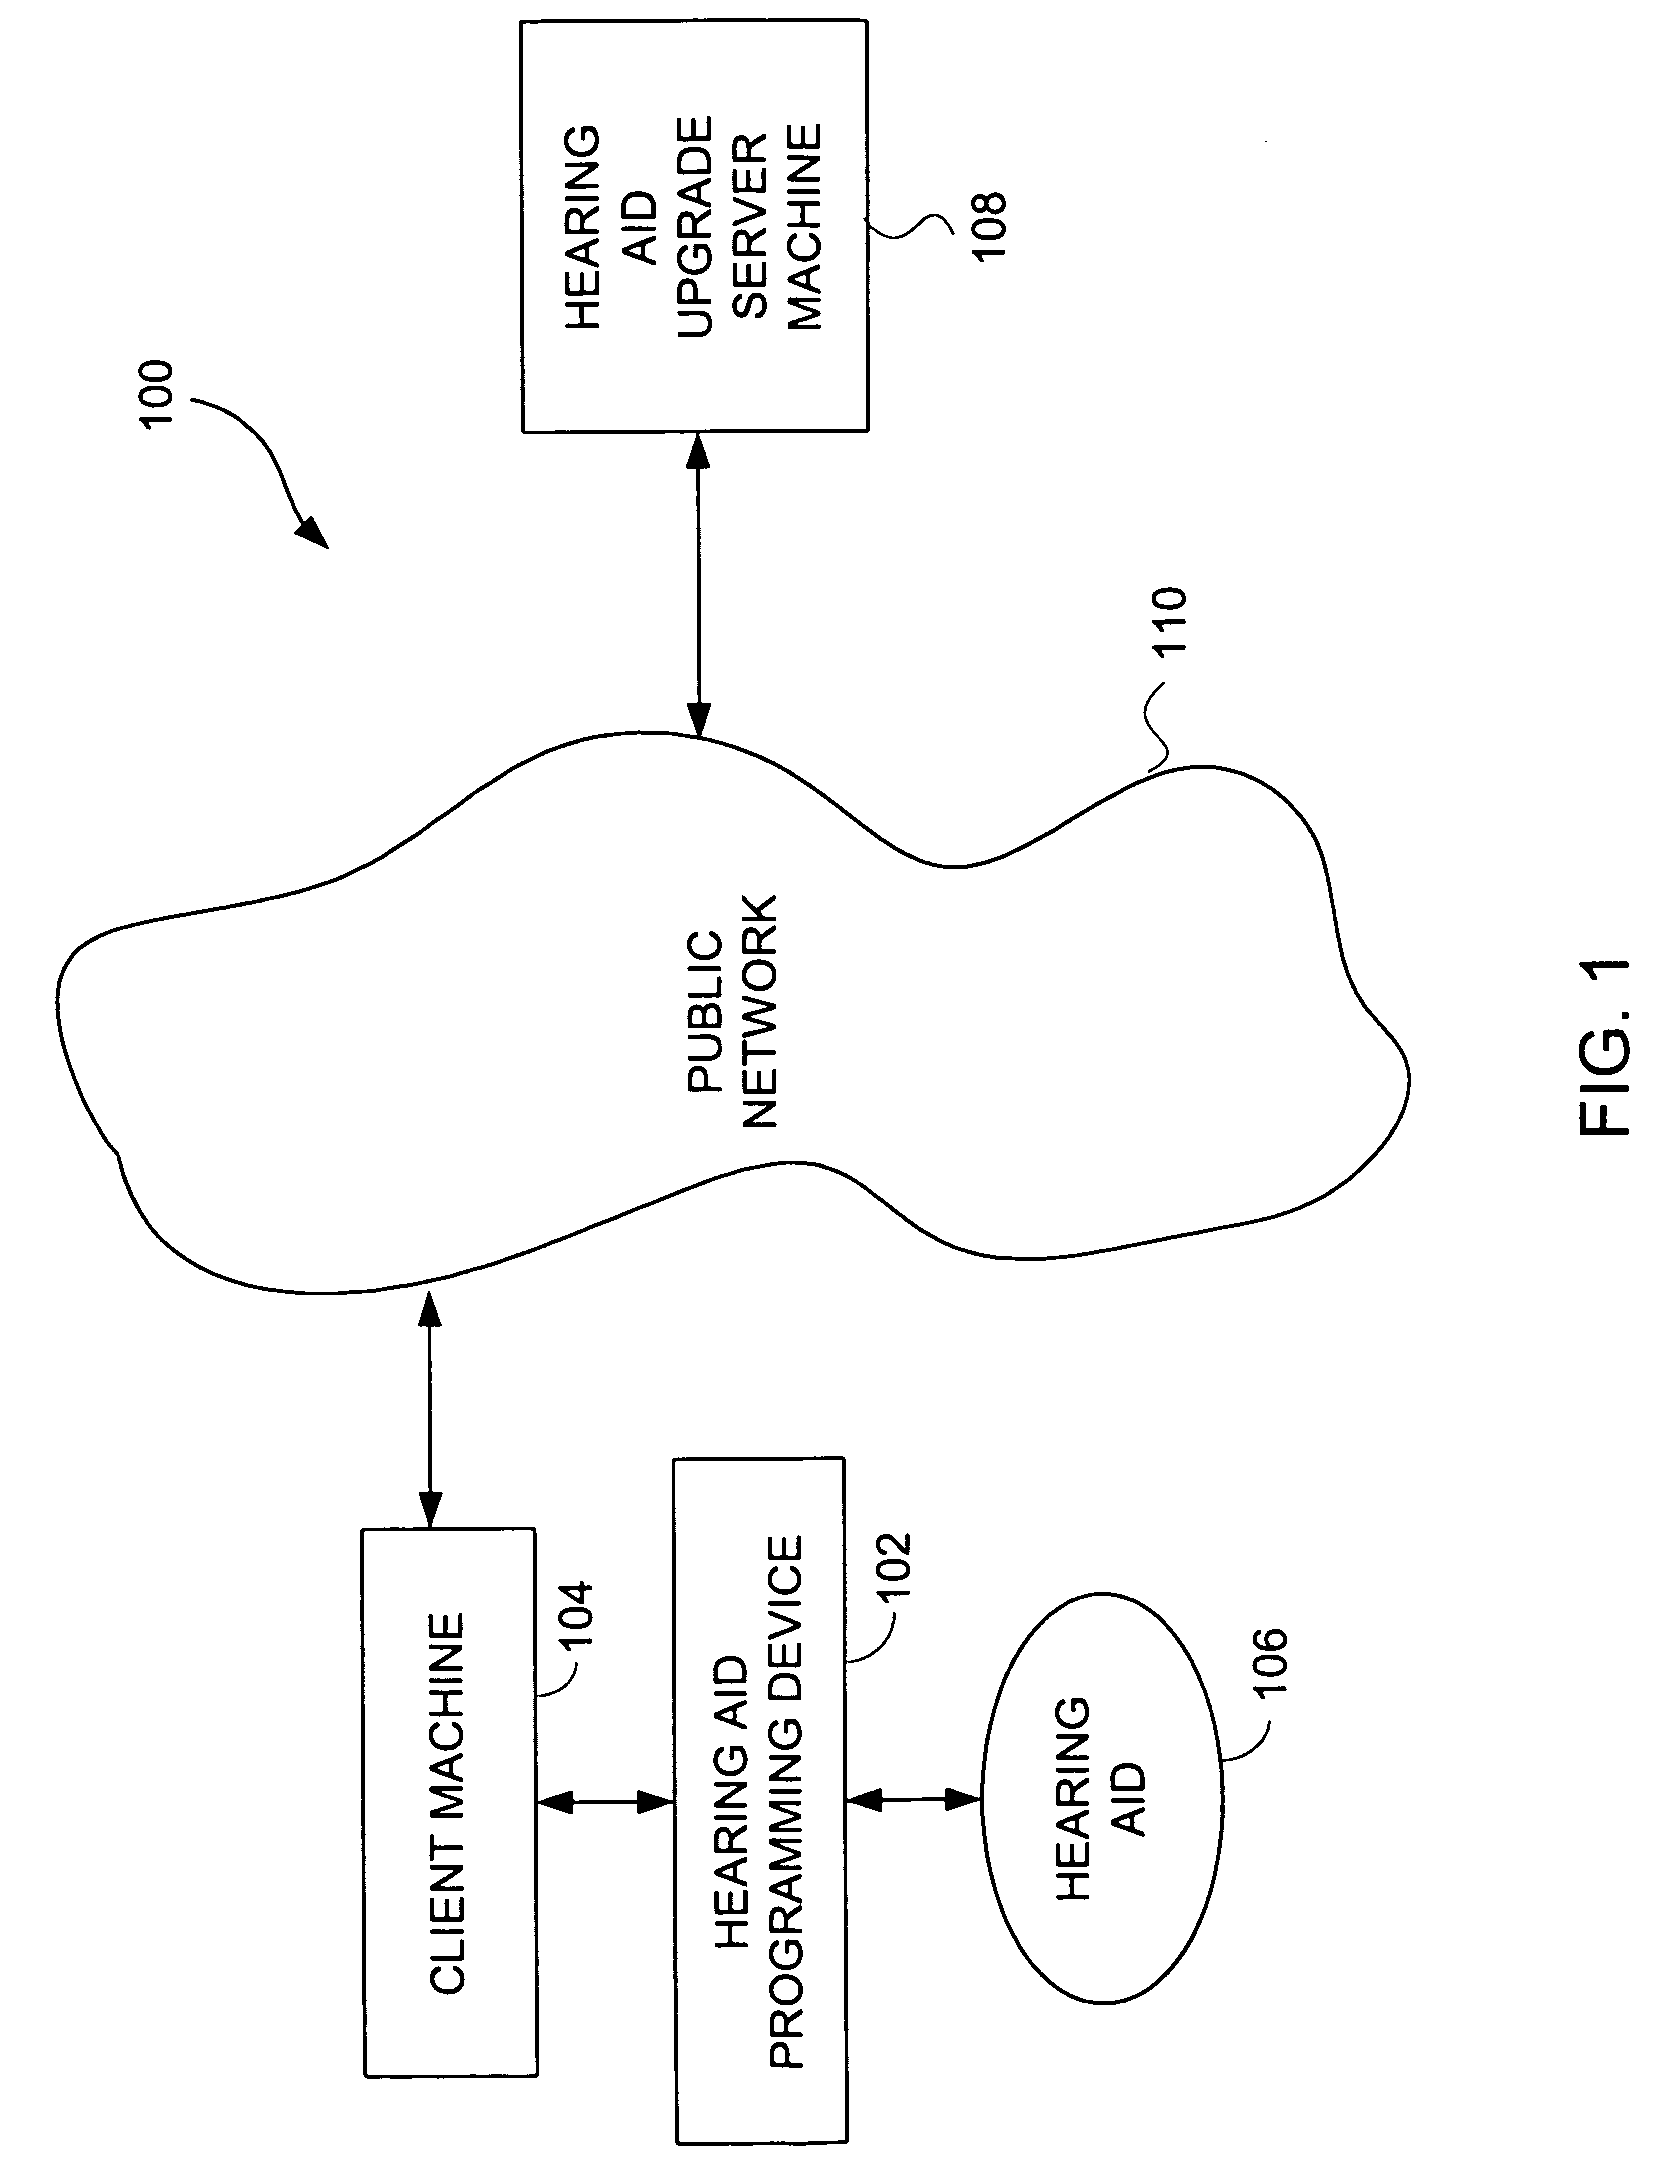 Method and system for remotely upgrading a hearing aid device